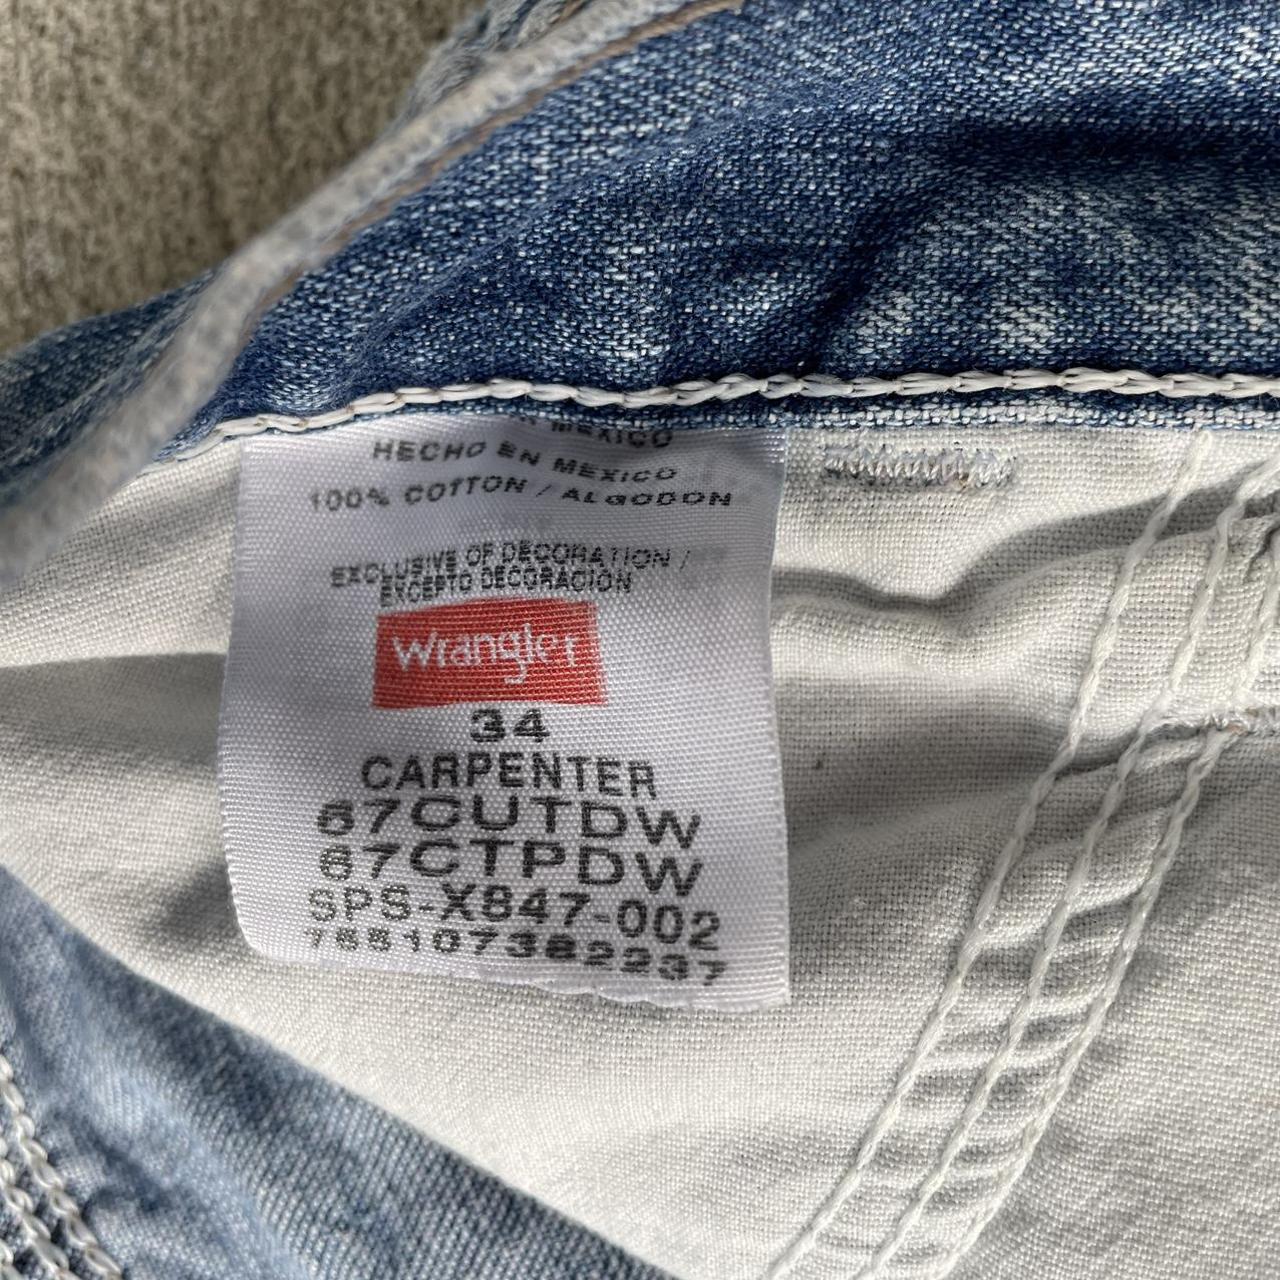 Wrangler jorts -size 34 -great condition besides a... - Depop